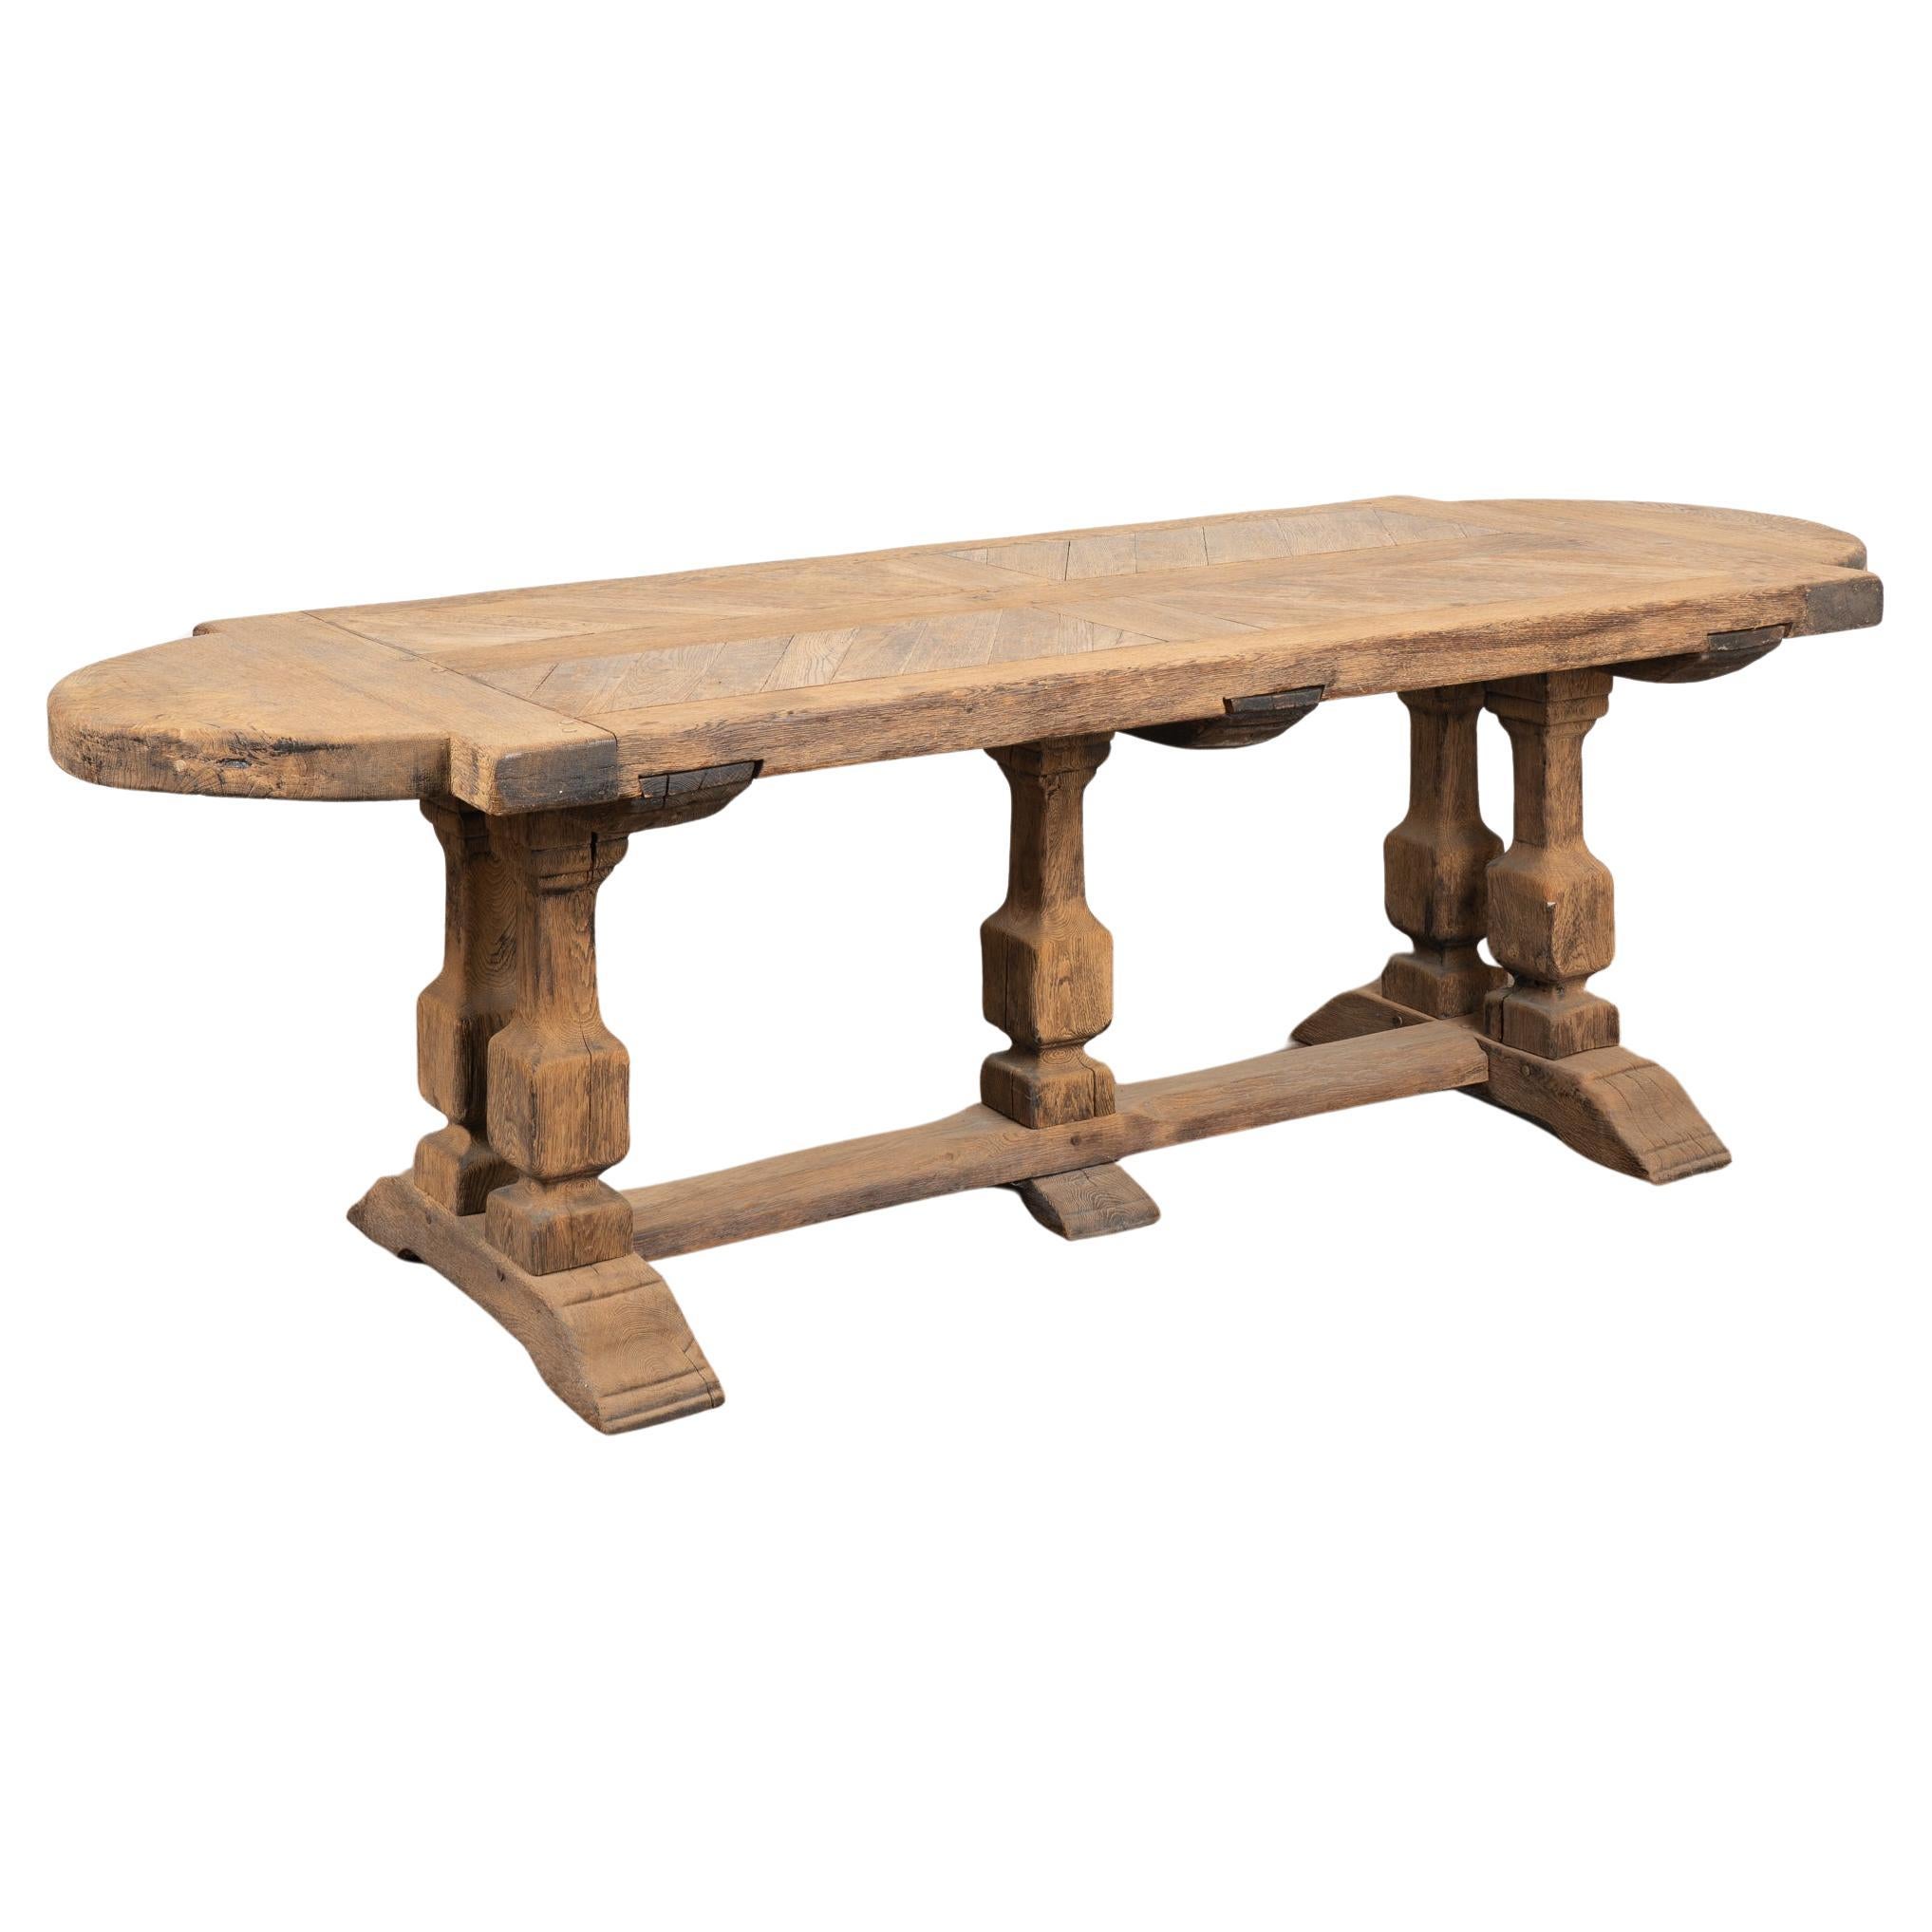 Bleached Oak Dining Table, France circa 1920